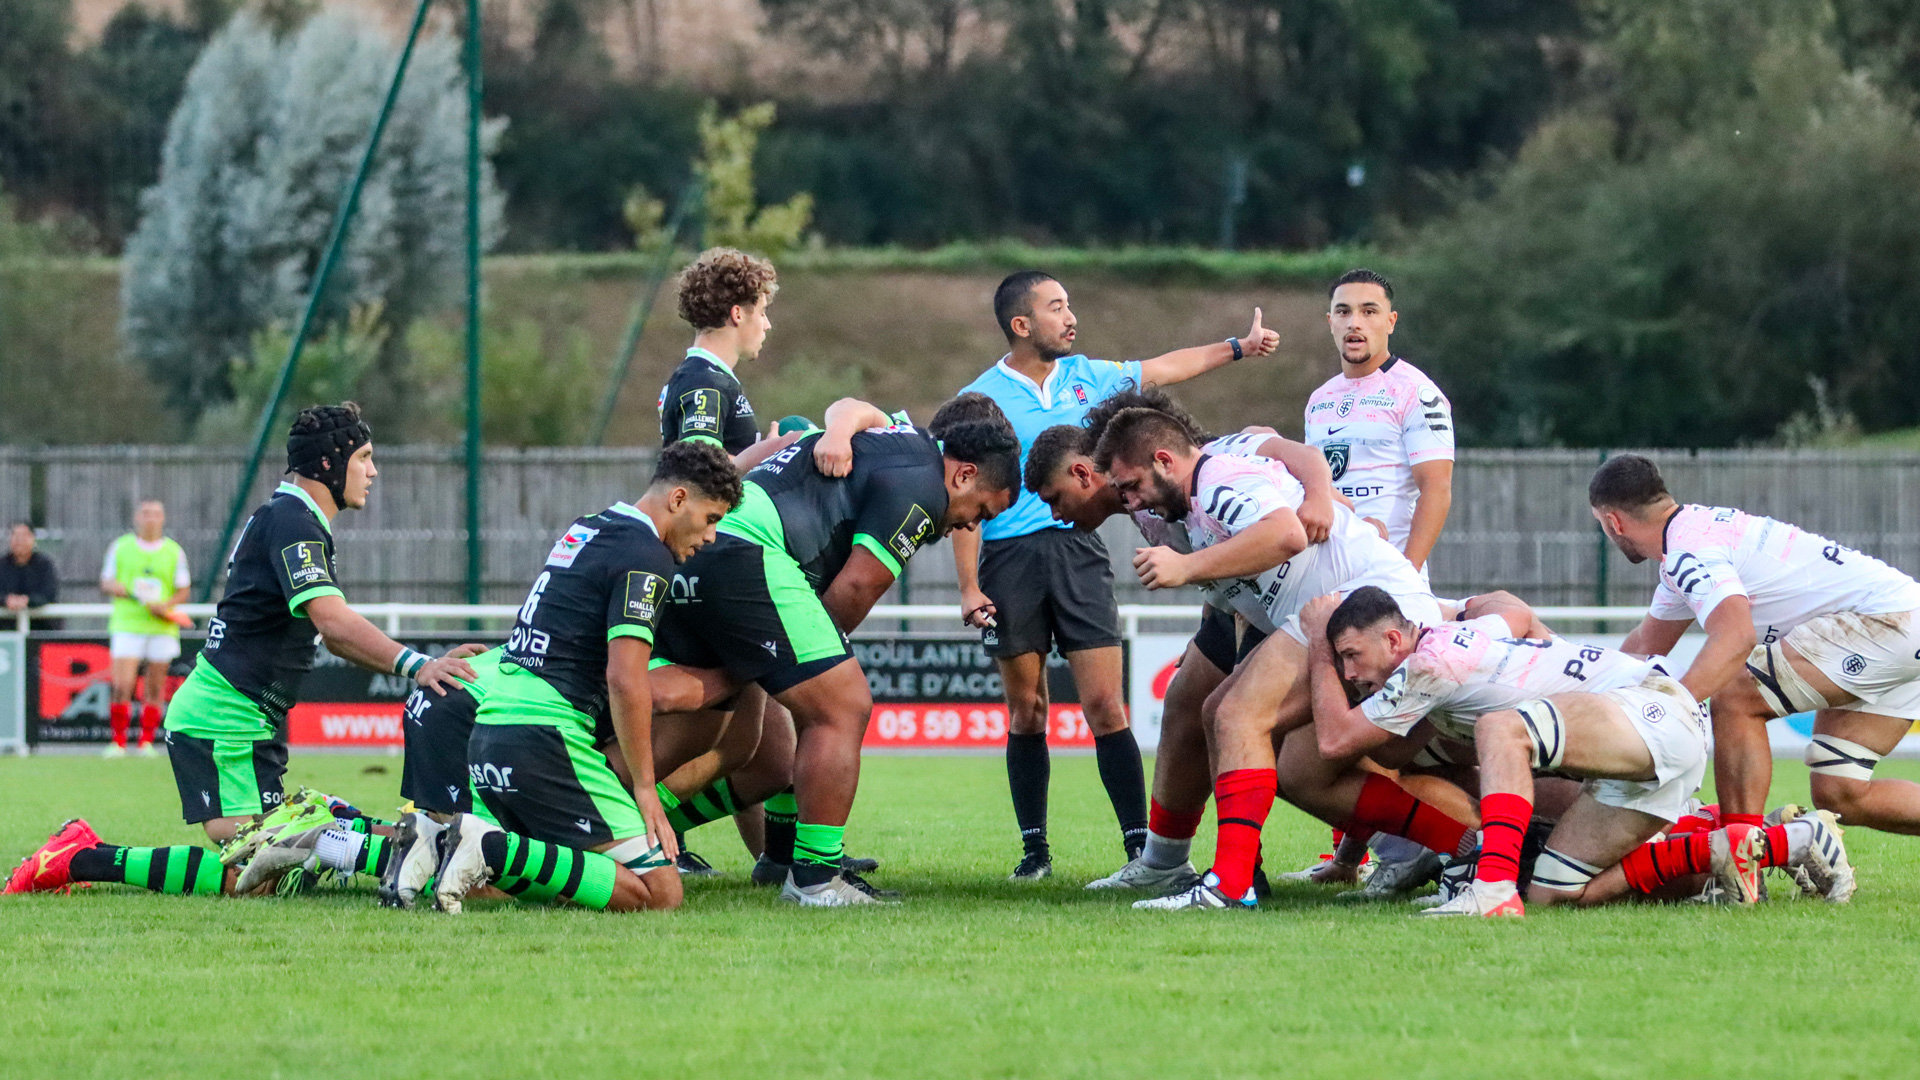 Espoirs Match Amical Toulouse 4